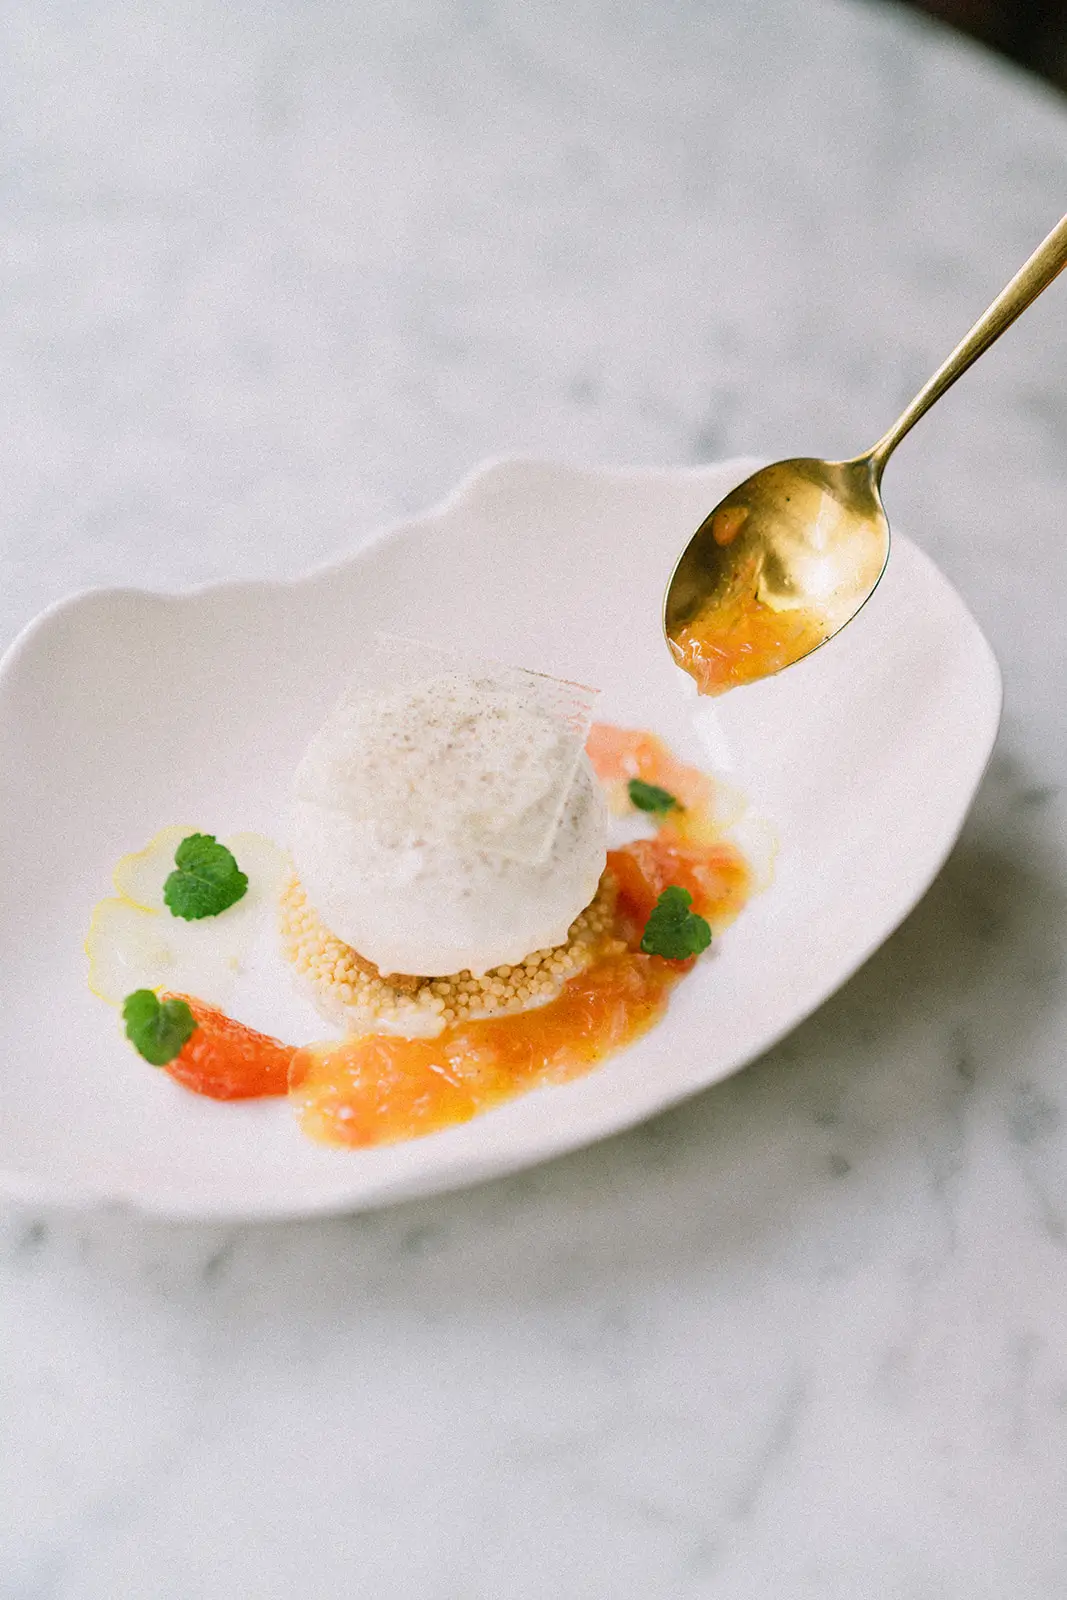 A delicate dessert at Virtus, a testament to the affordable luxury of Paris's Michelin-starred restaurants, featuring a scoop of ice cream atop a crunchy base, surrounded by citrus segments and fresh mint, served with a gold spoon on a marble surface.